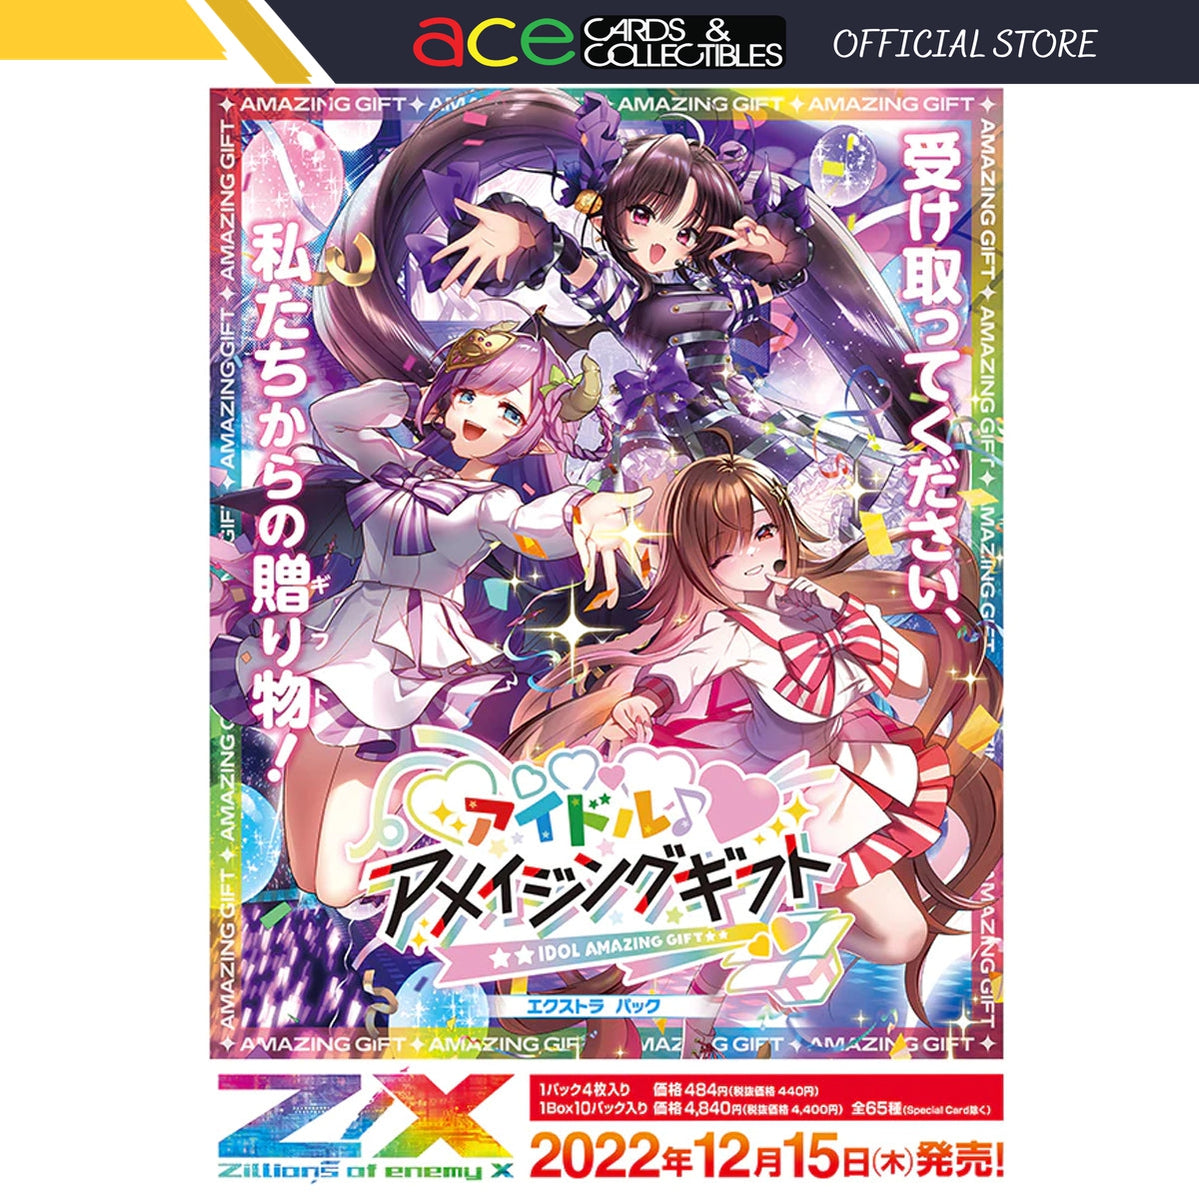 Z/X -Zillions of enemy X- The Extra Pack The 37th &quot;Idol Amazing Gift&quot; [E37] (Japanese)-EX Pack (Random)-Broccoli-Ace Cards &amp; Collectibles